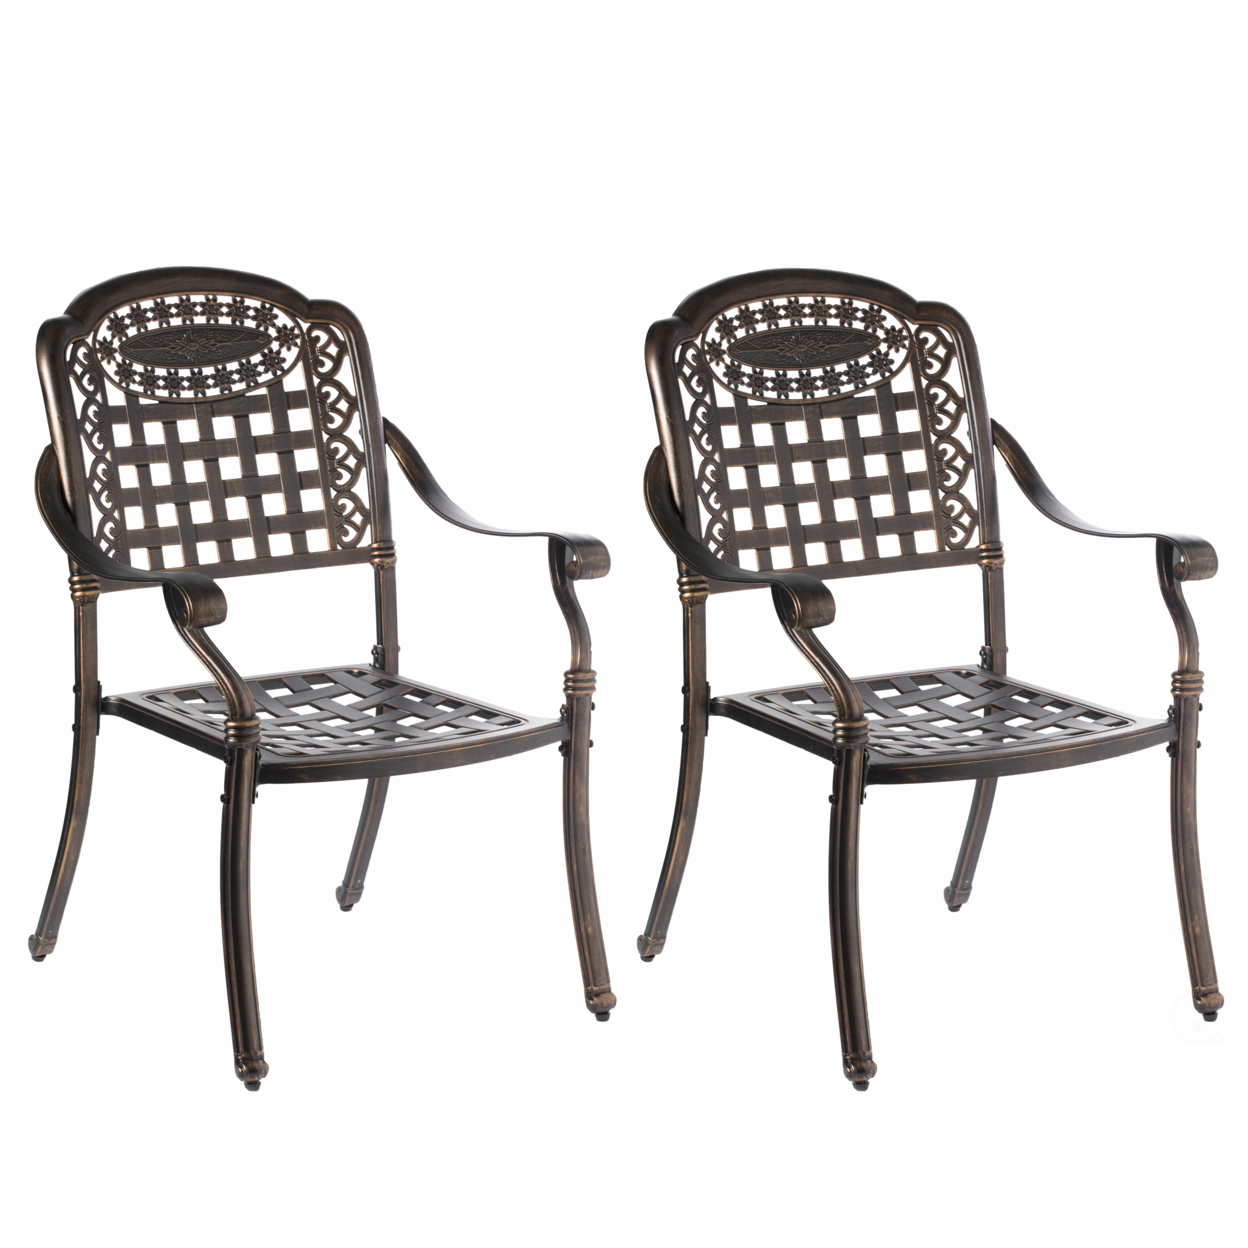 Indoor And Outdoor Bronze Dinning Set 2 Chairs With 1 Table Cast Aluminum. - Chairs